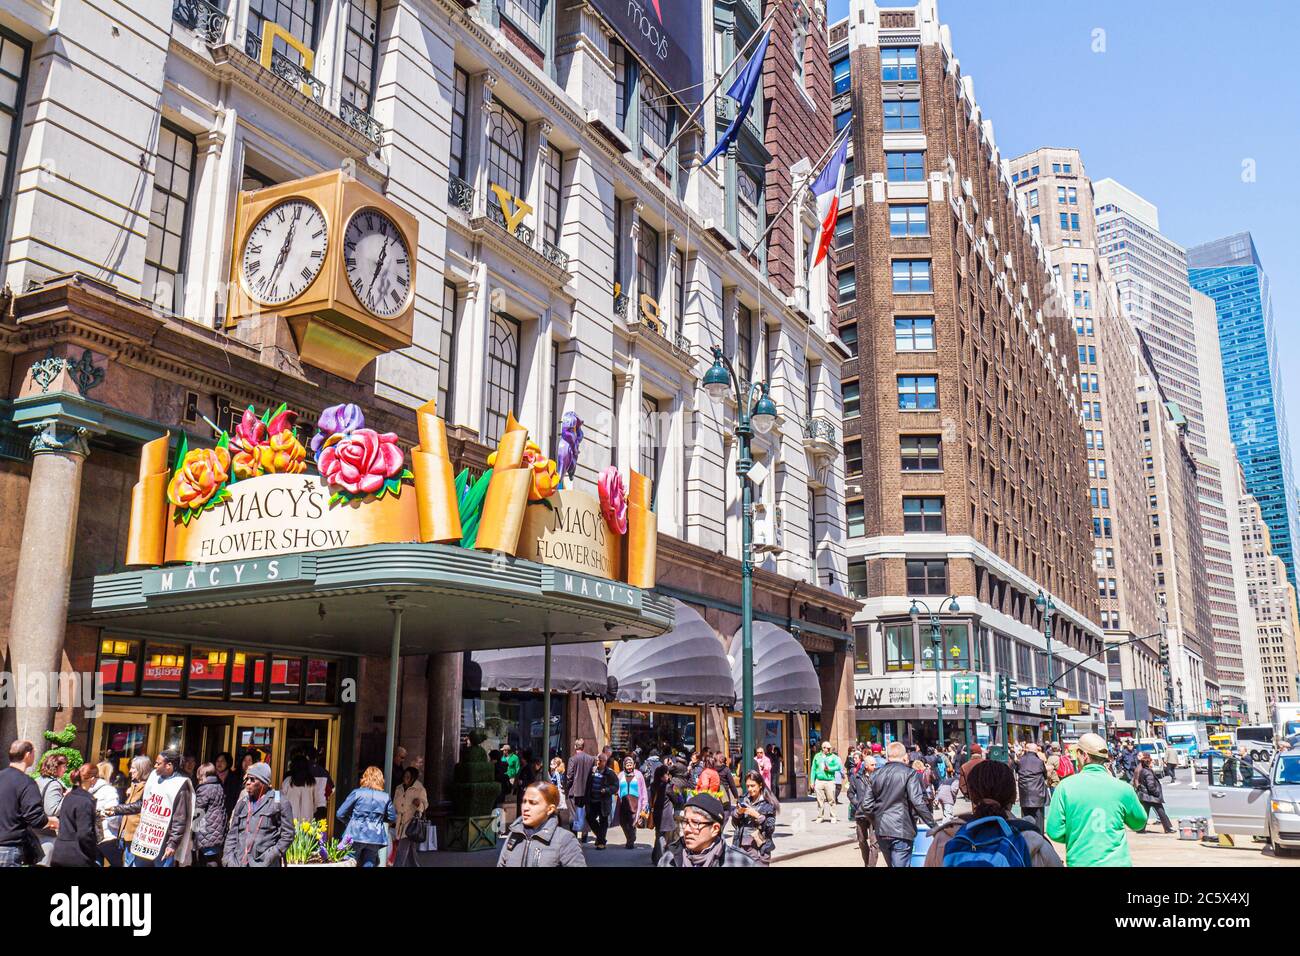 New York City,NYC NY Manhattan,Midtown,34th Street,Macy's,retail chain,Herald Square,department store,building,outside exterior,front,entrance,Flower Stock Photo